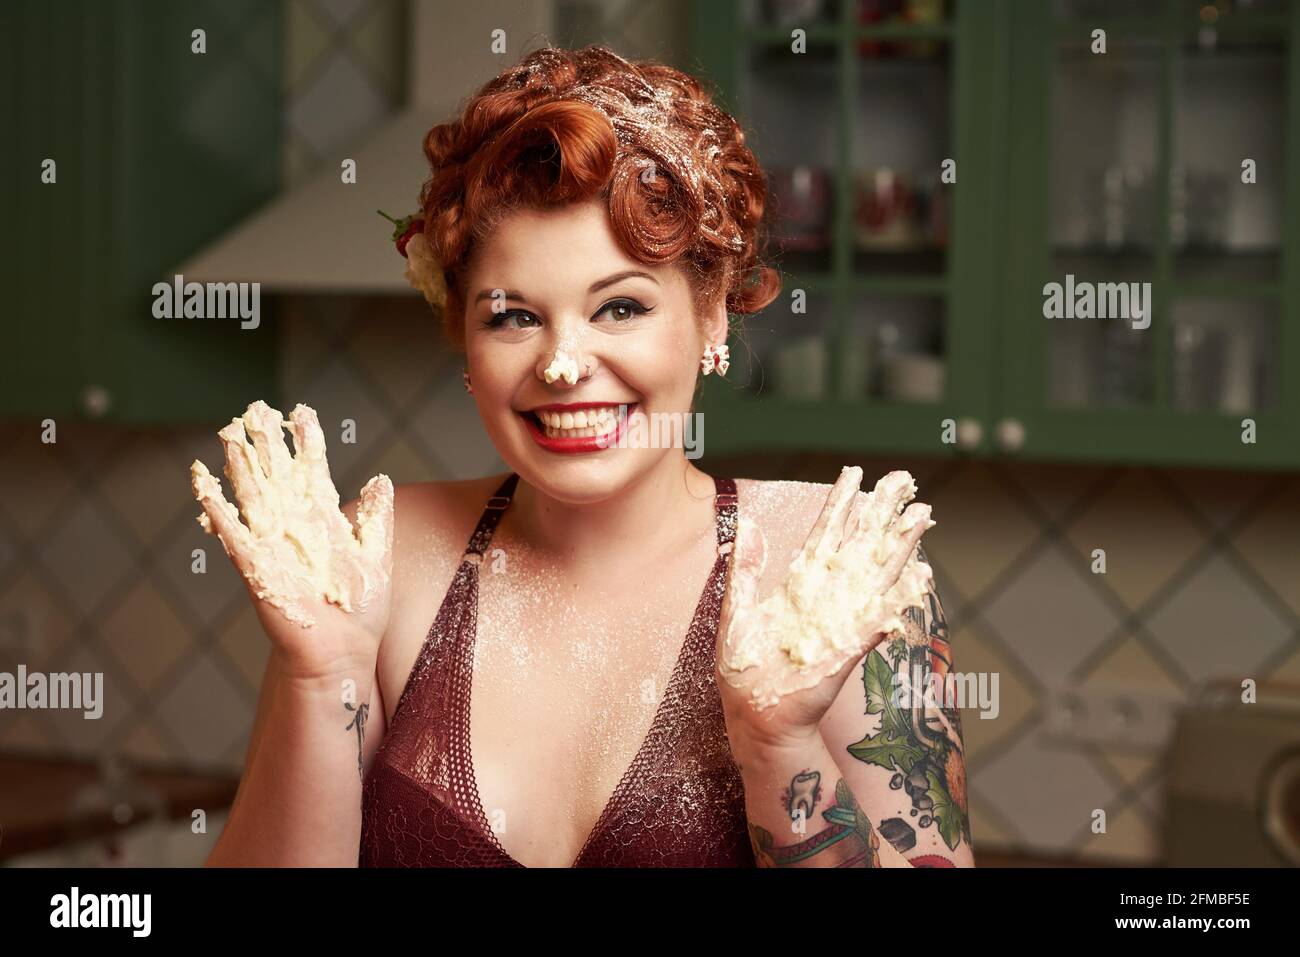 Pin-up girl with red hair baking in the kitchen Stock Photo